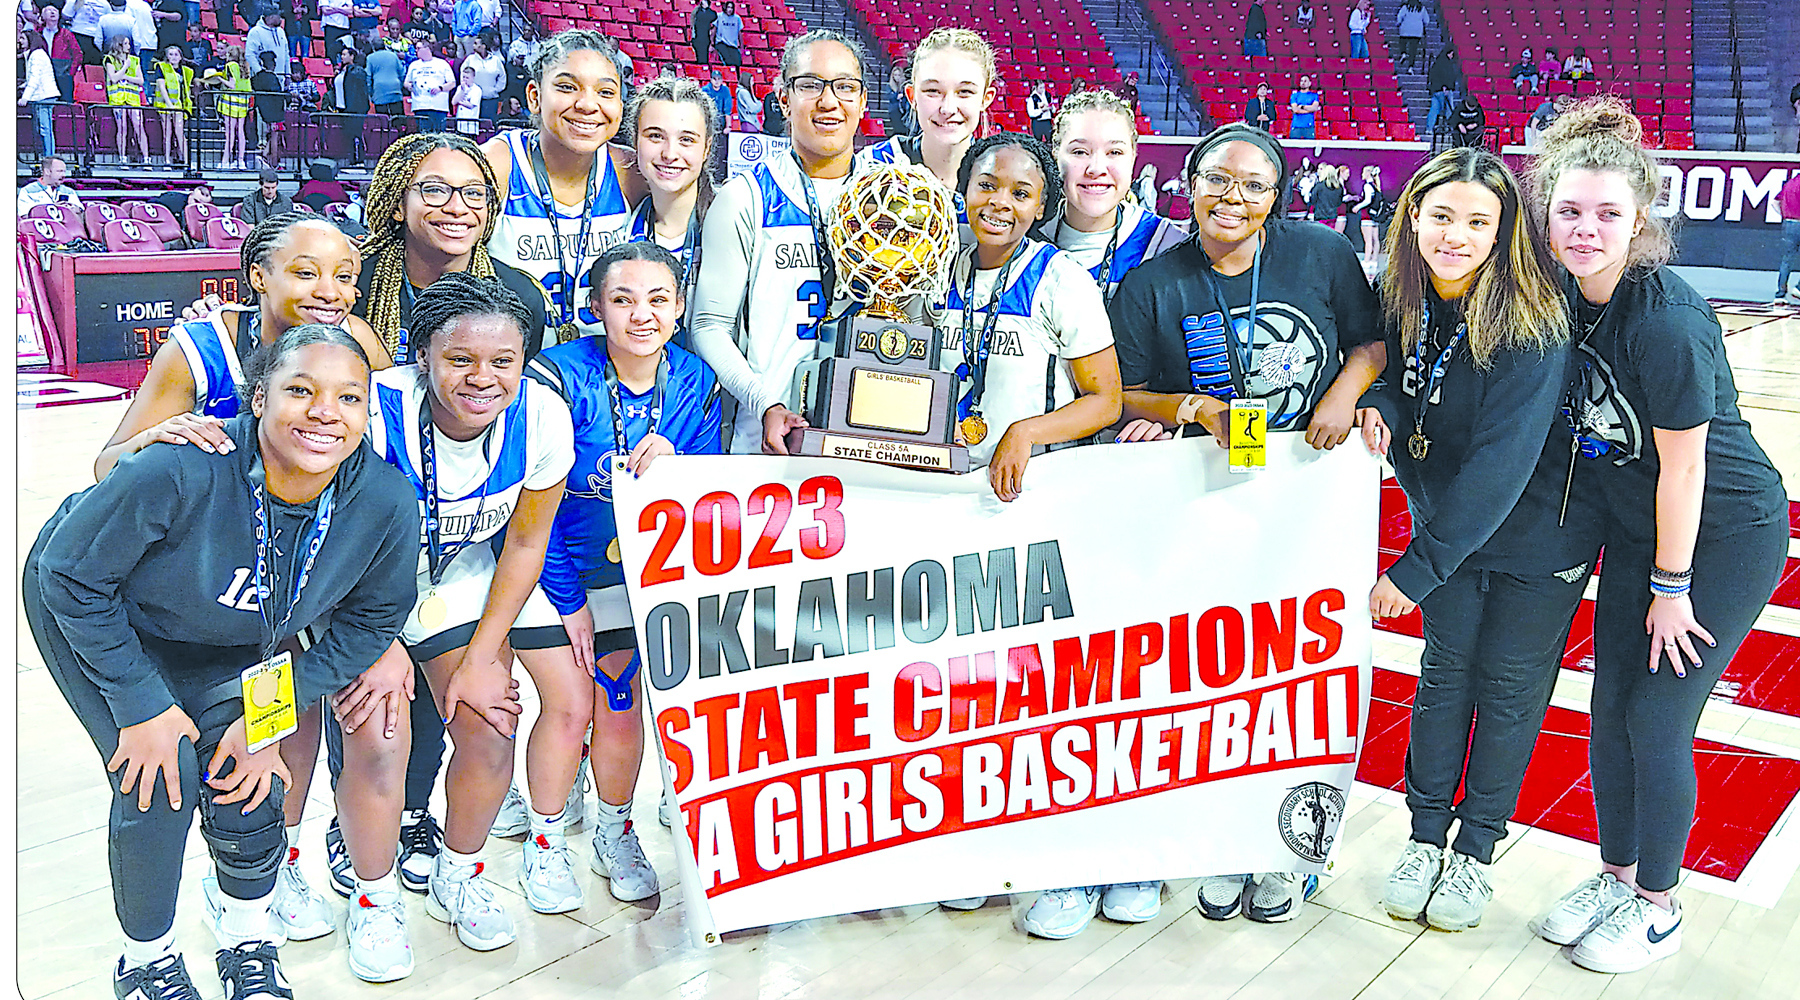 DARREN SUMNER PHOTO 5A STATE CHAMPIONS Sapulpa Lady Chieftains win 2023 state title in March at the Lloyd Noble Center in Norman to claim their sixth Gold Ball in school history.